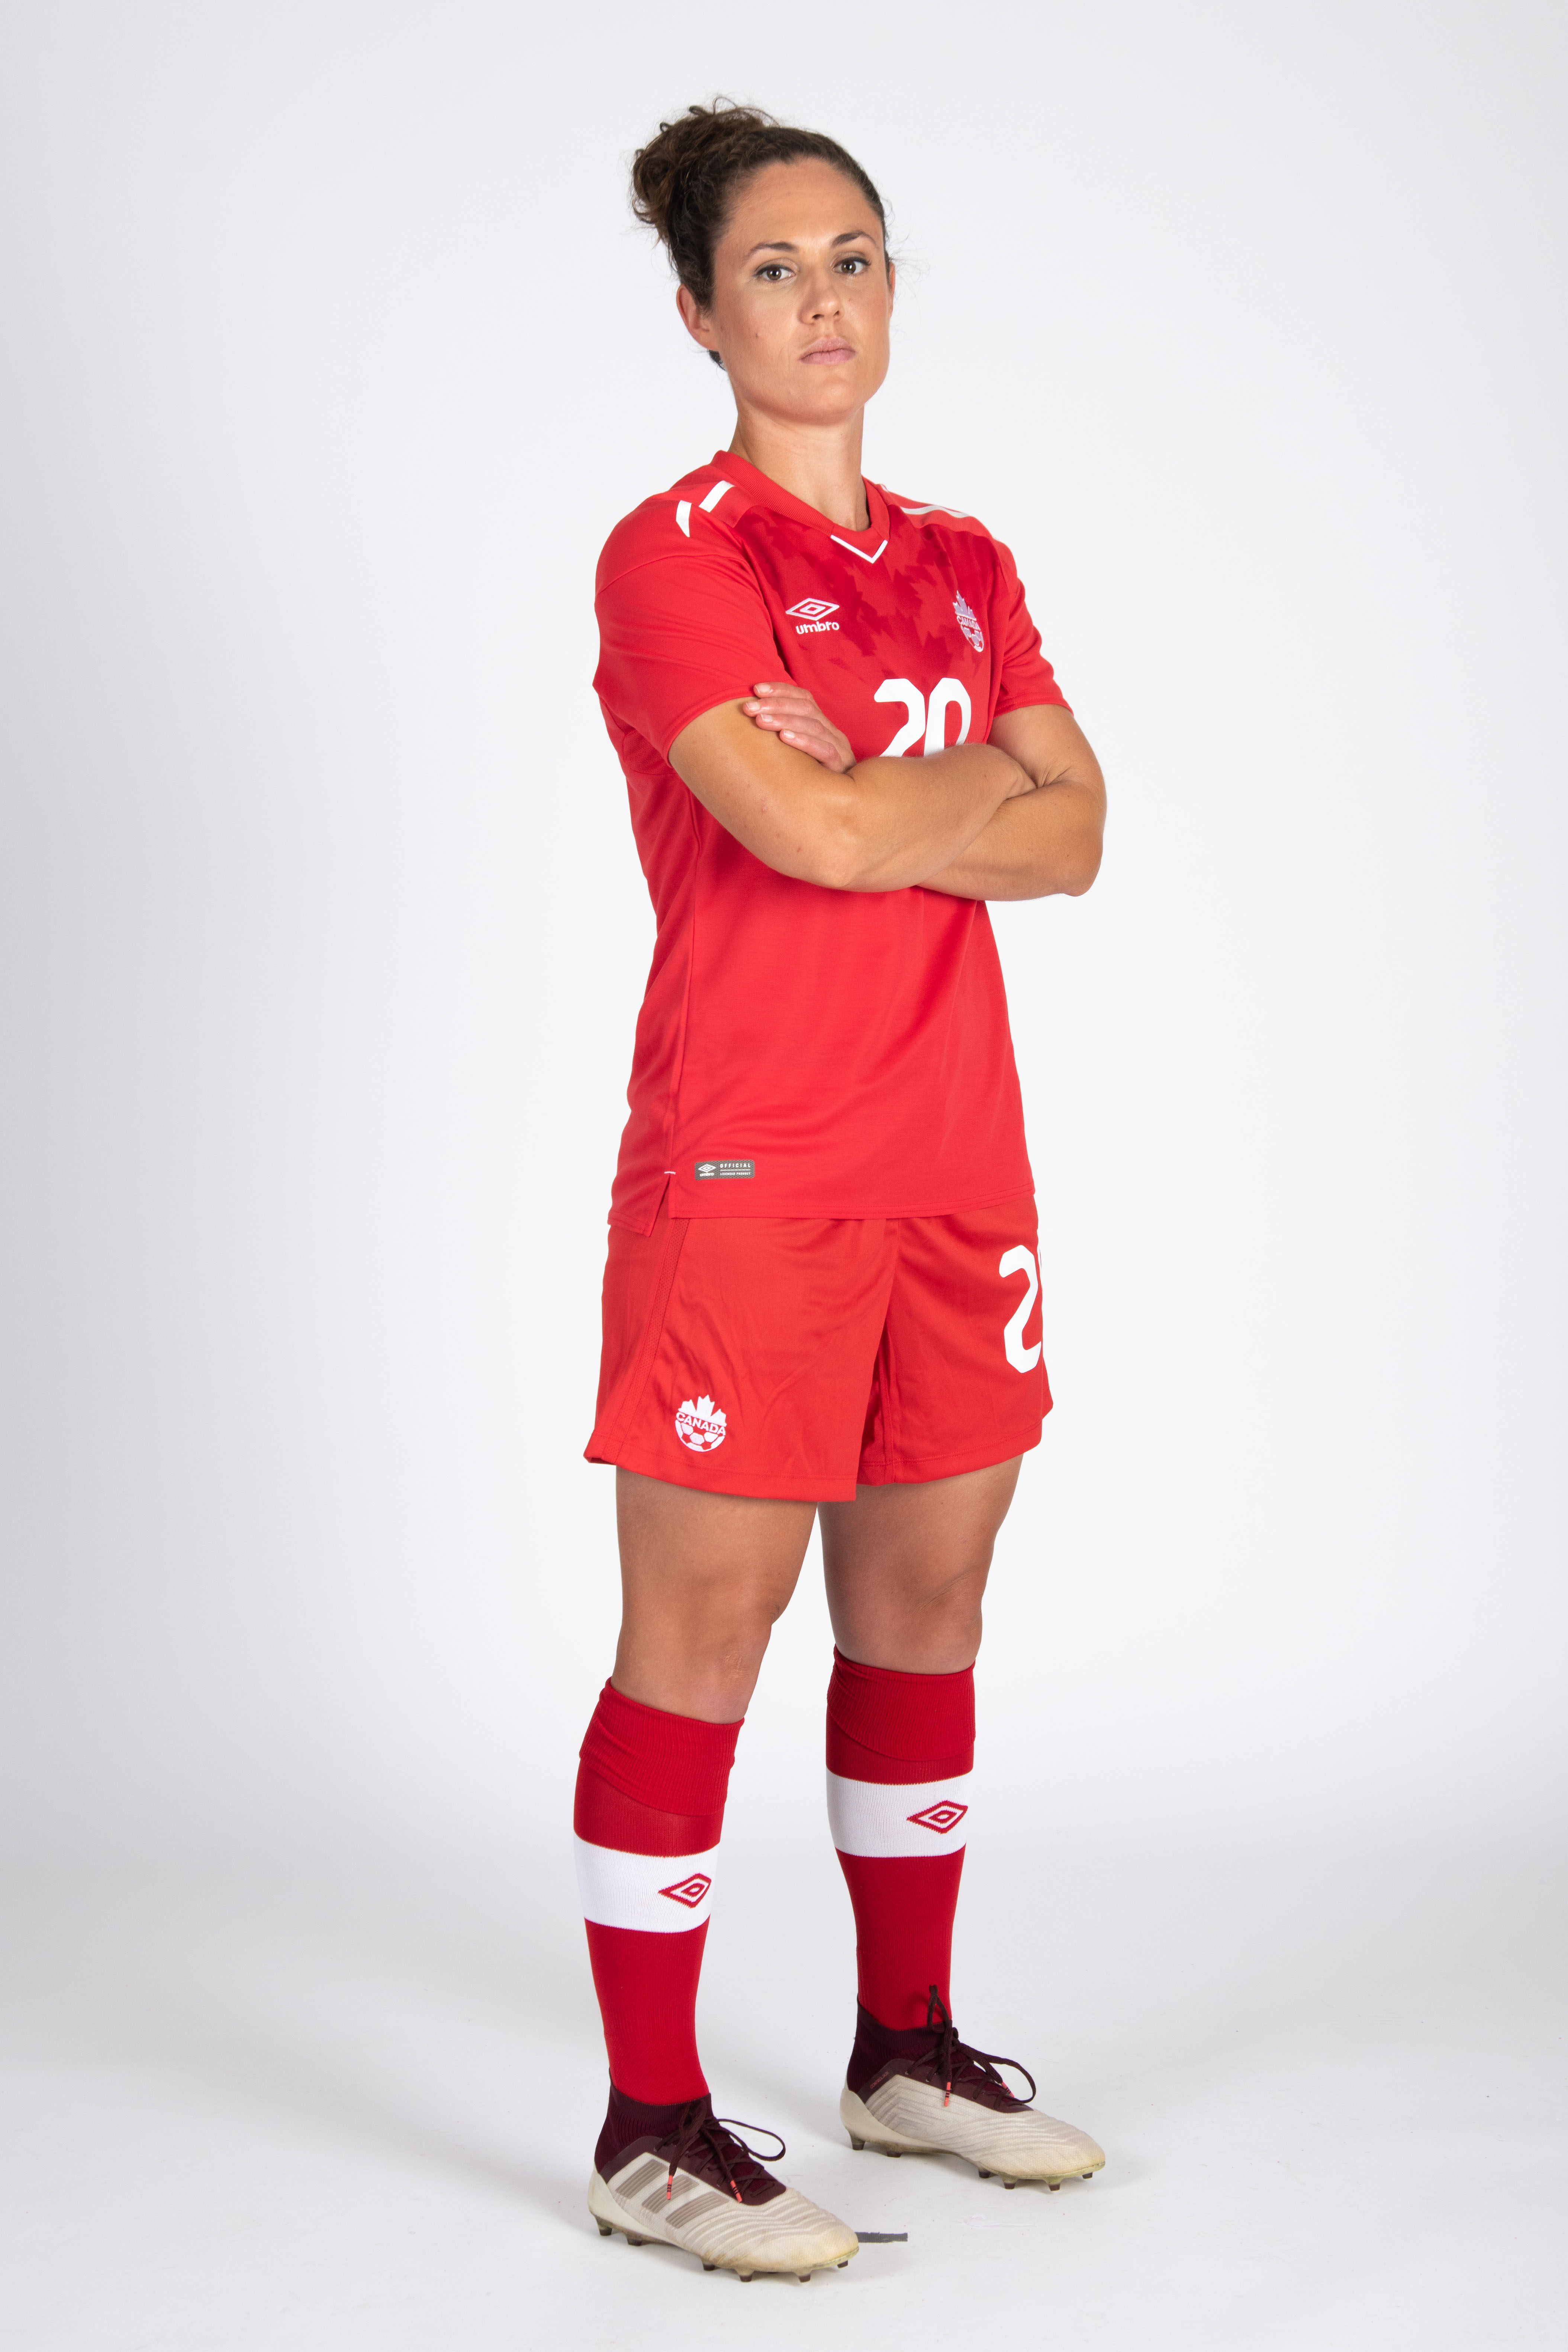 20180604_CANWNT_Woeller_byBazyl20